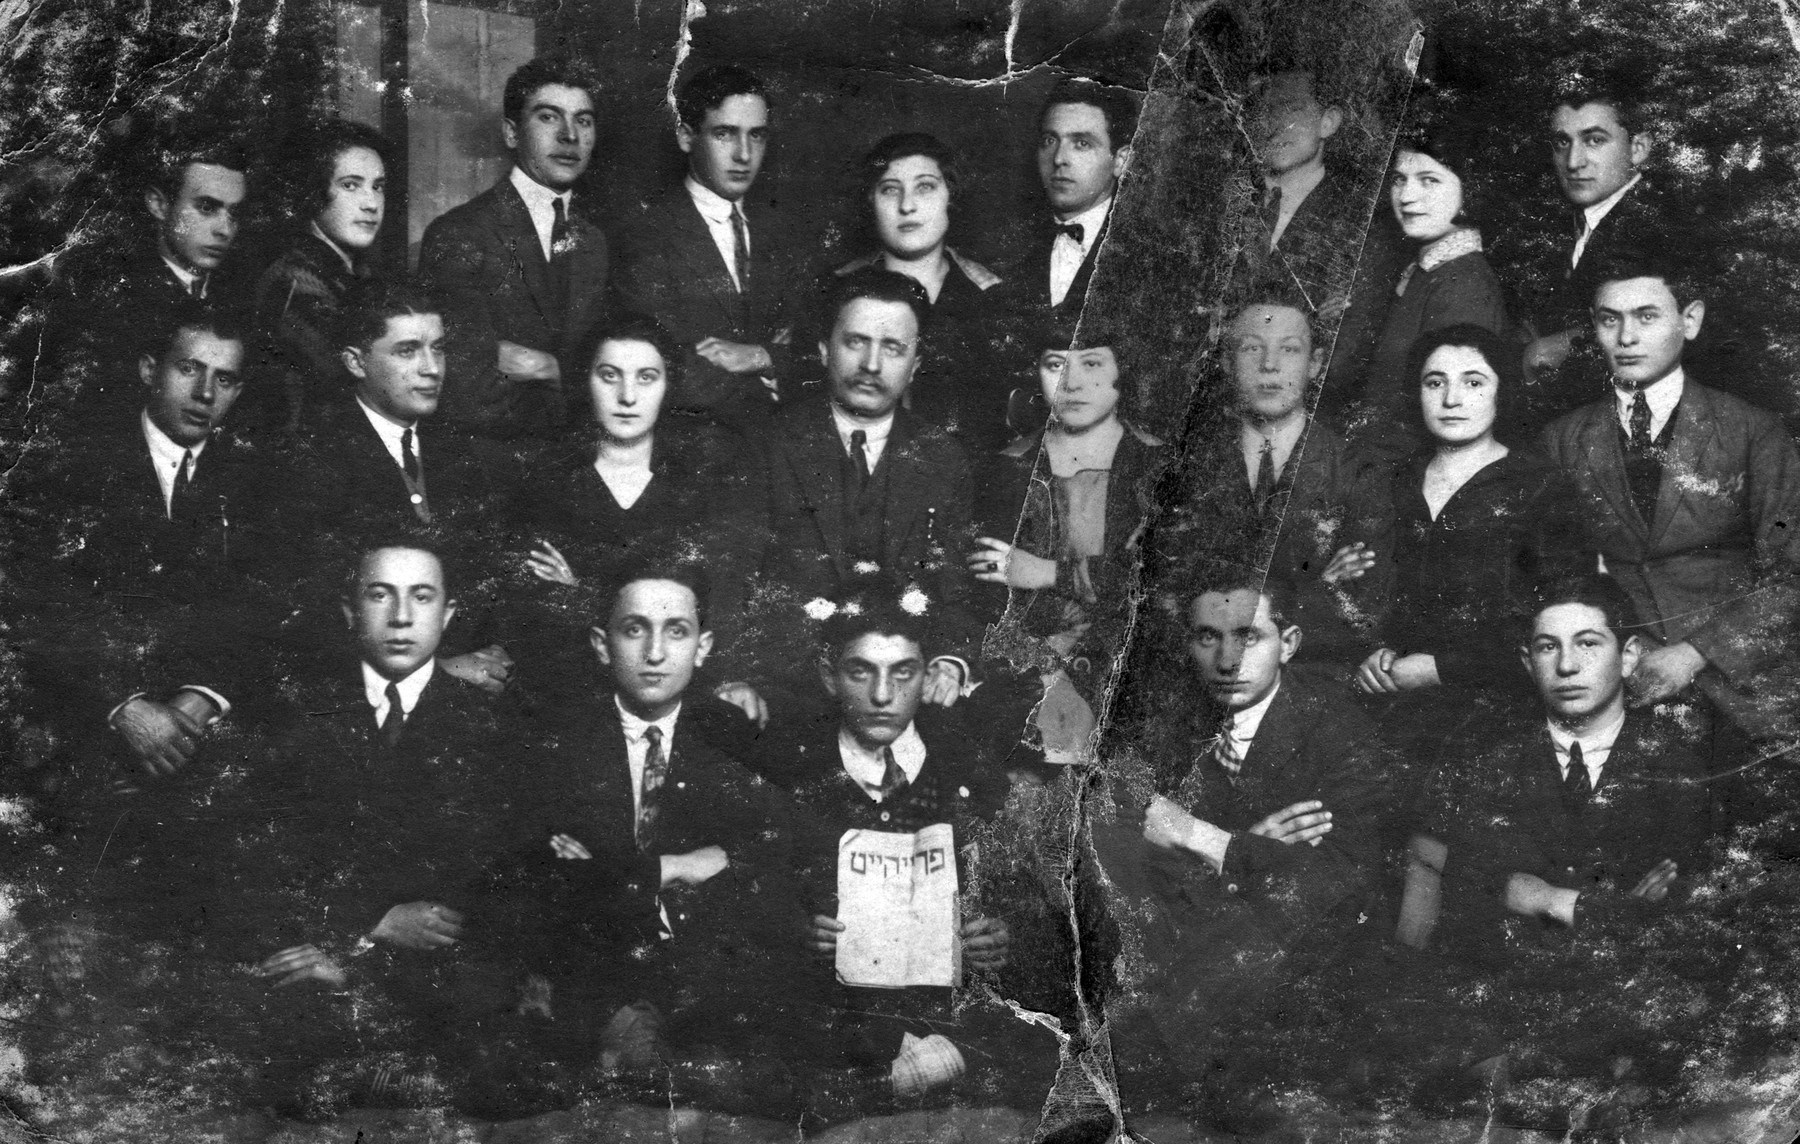 Group portrait of members of Poalei Zion Zionist youth organization in Bedzin.

The young man in the front row holds an issue of a Zionist newspaper 'Freiheit' [Freedom].

Among those pictured is Berl Loker, the leader of the group (second row, center) and Anszel Borzykowski (second row, third from the right).